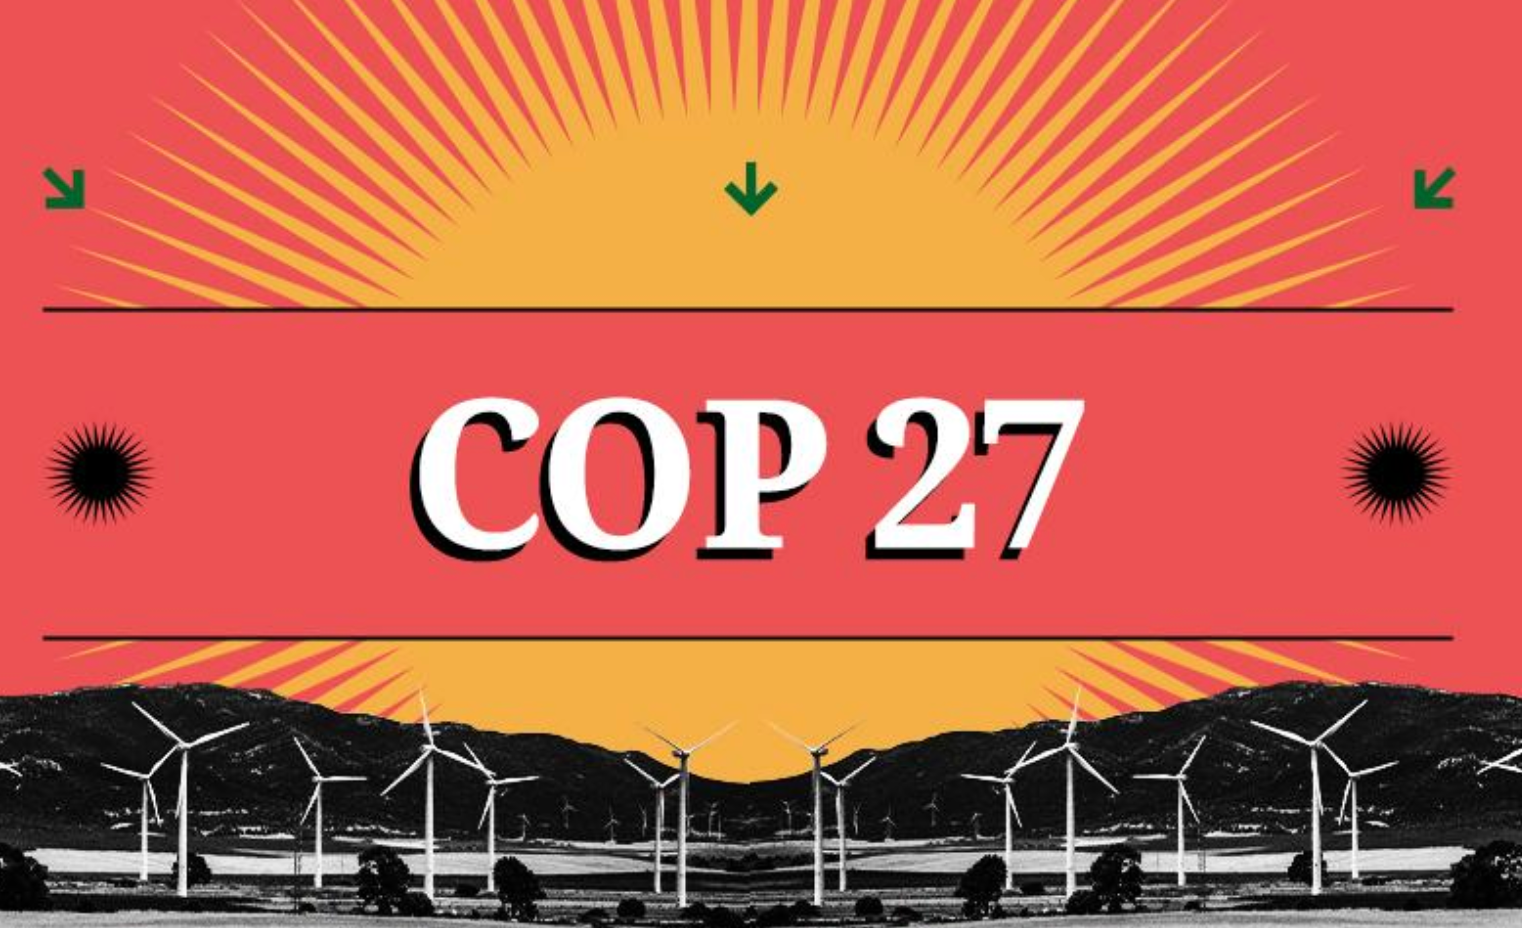 Cop27 in Egypt - Green & Ethical Checklist from The Guardian